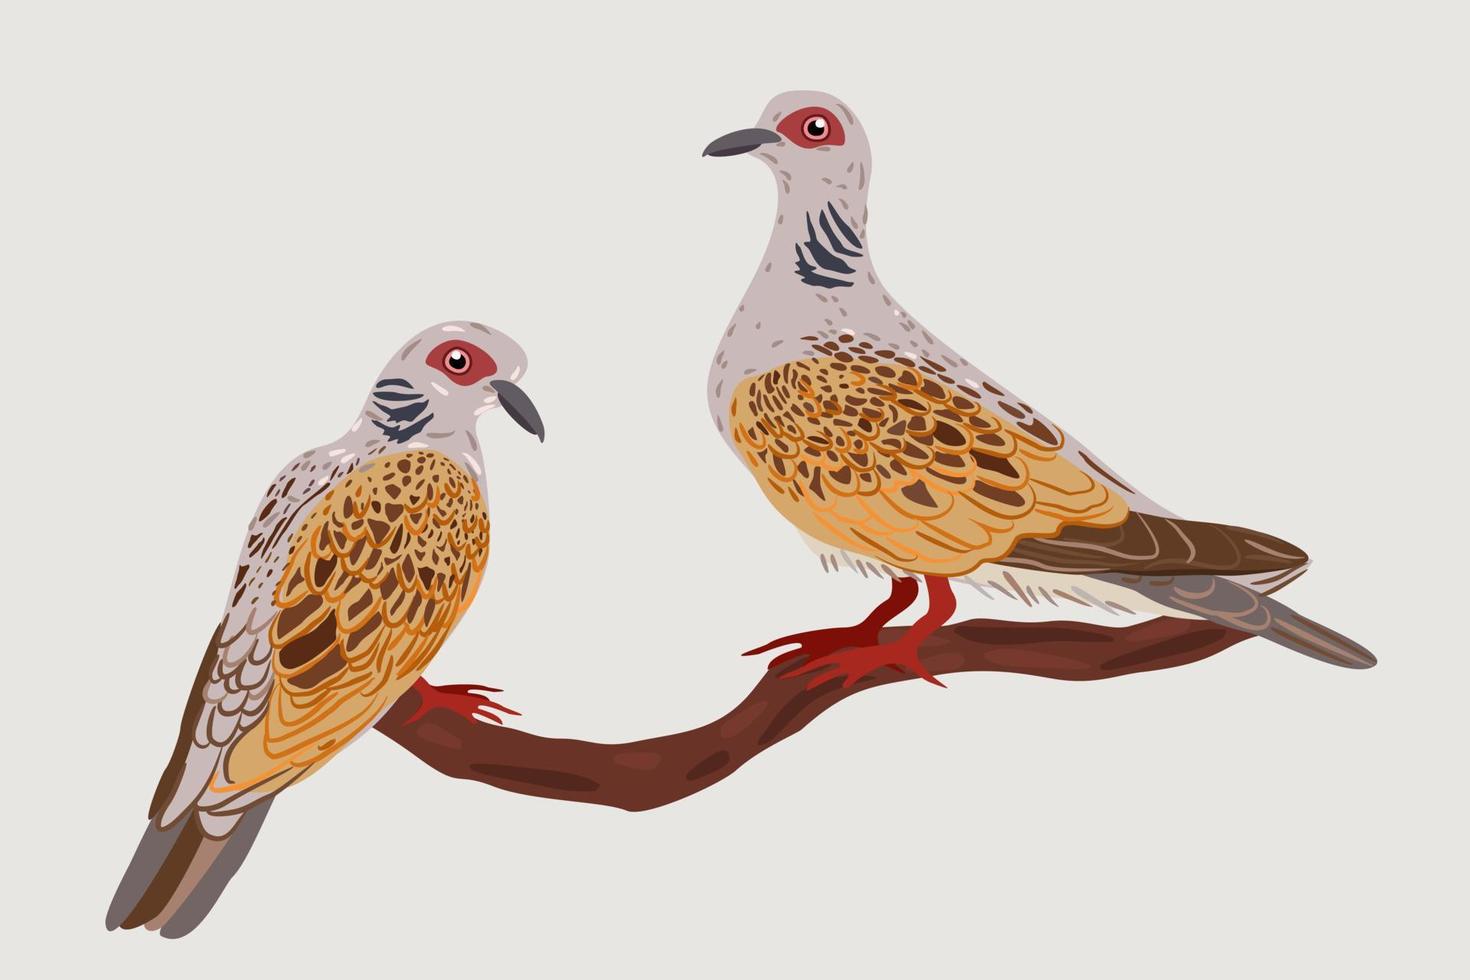 Vector isolated illustration of two turtle doves on a branch.